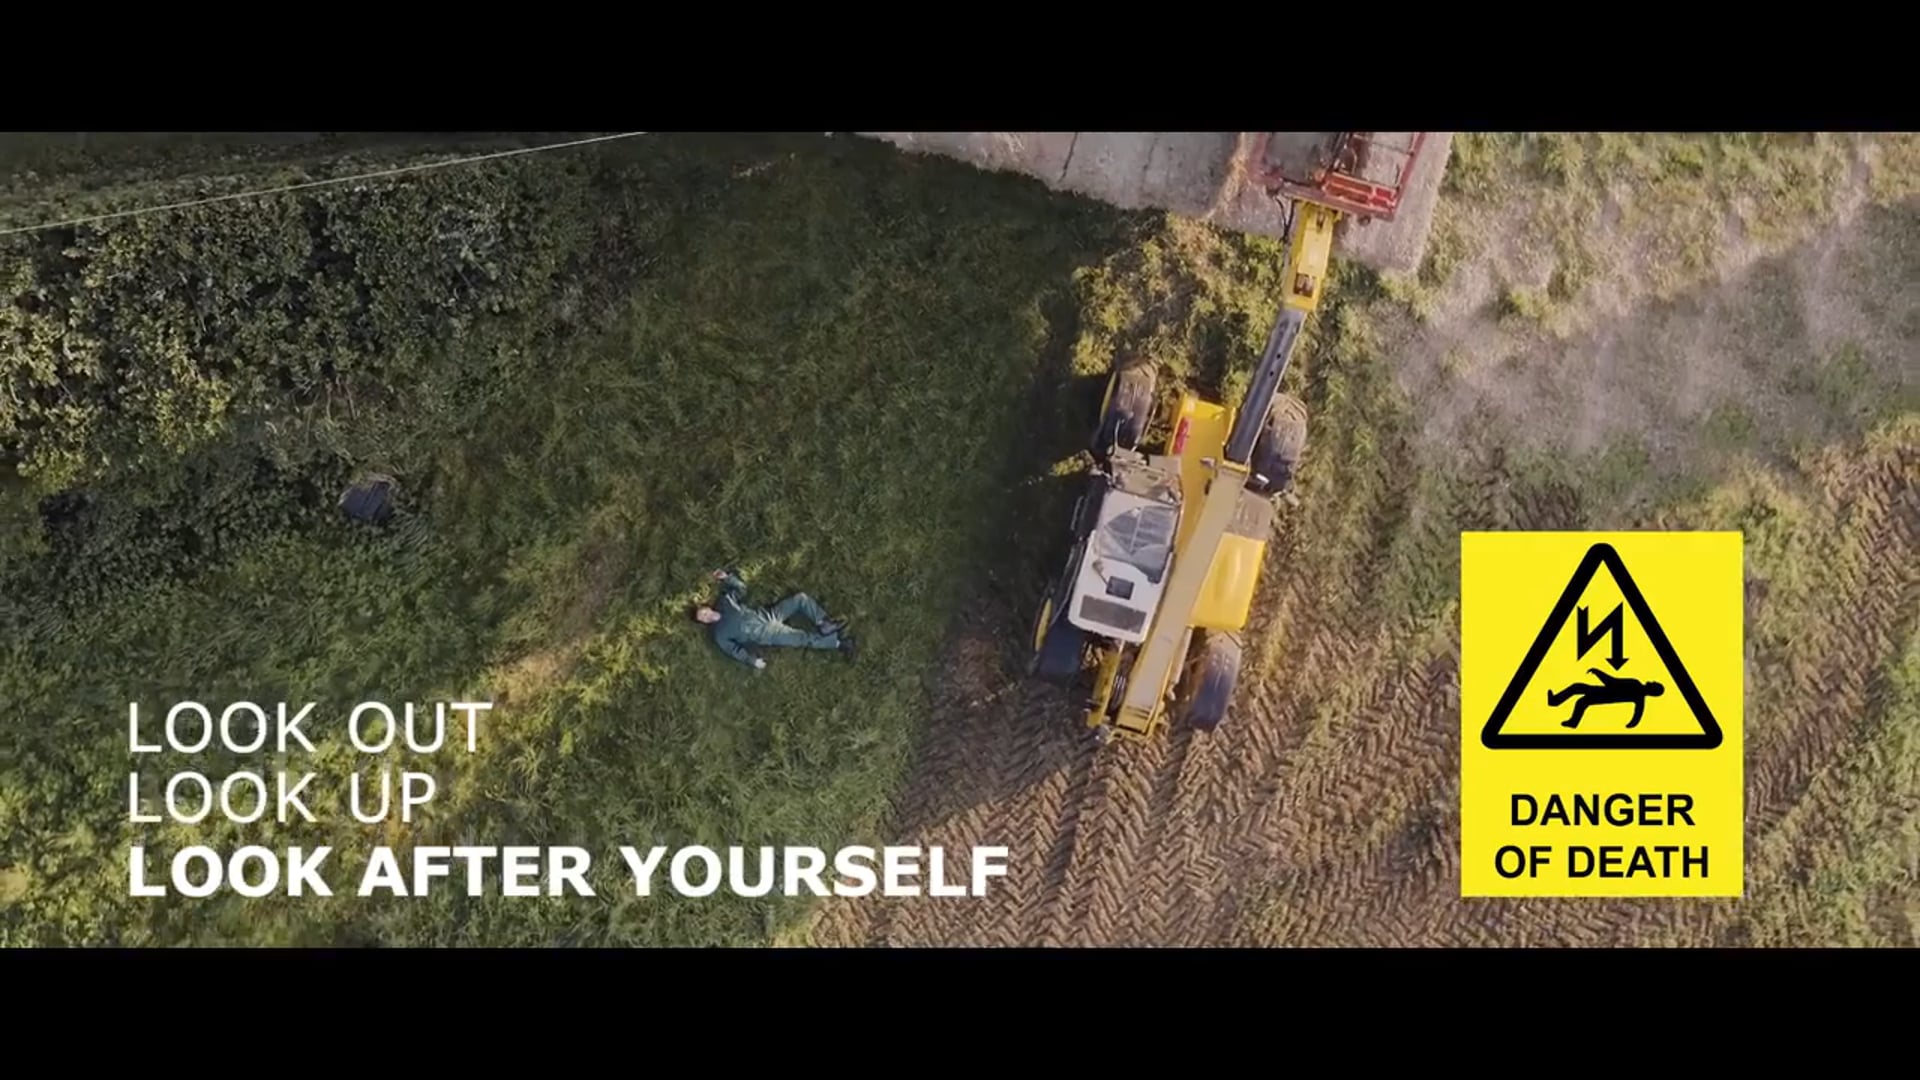 Look Out Look Up - Overhead Lines Safety Film